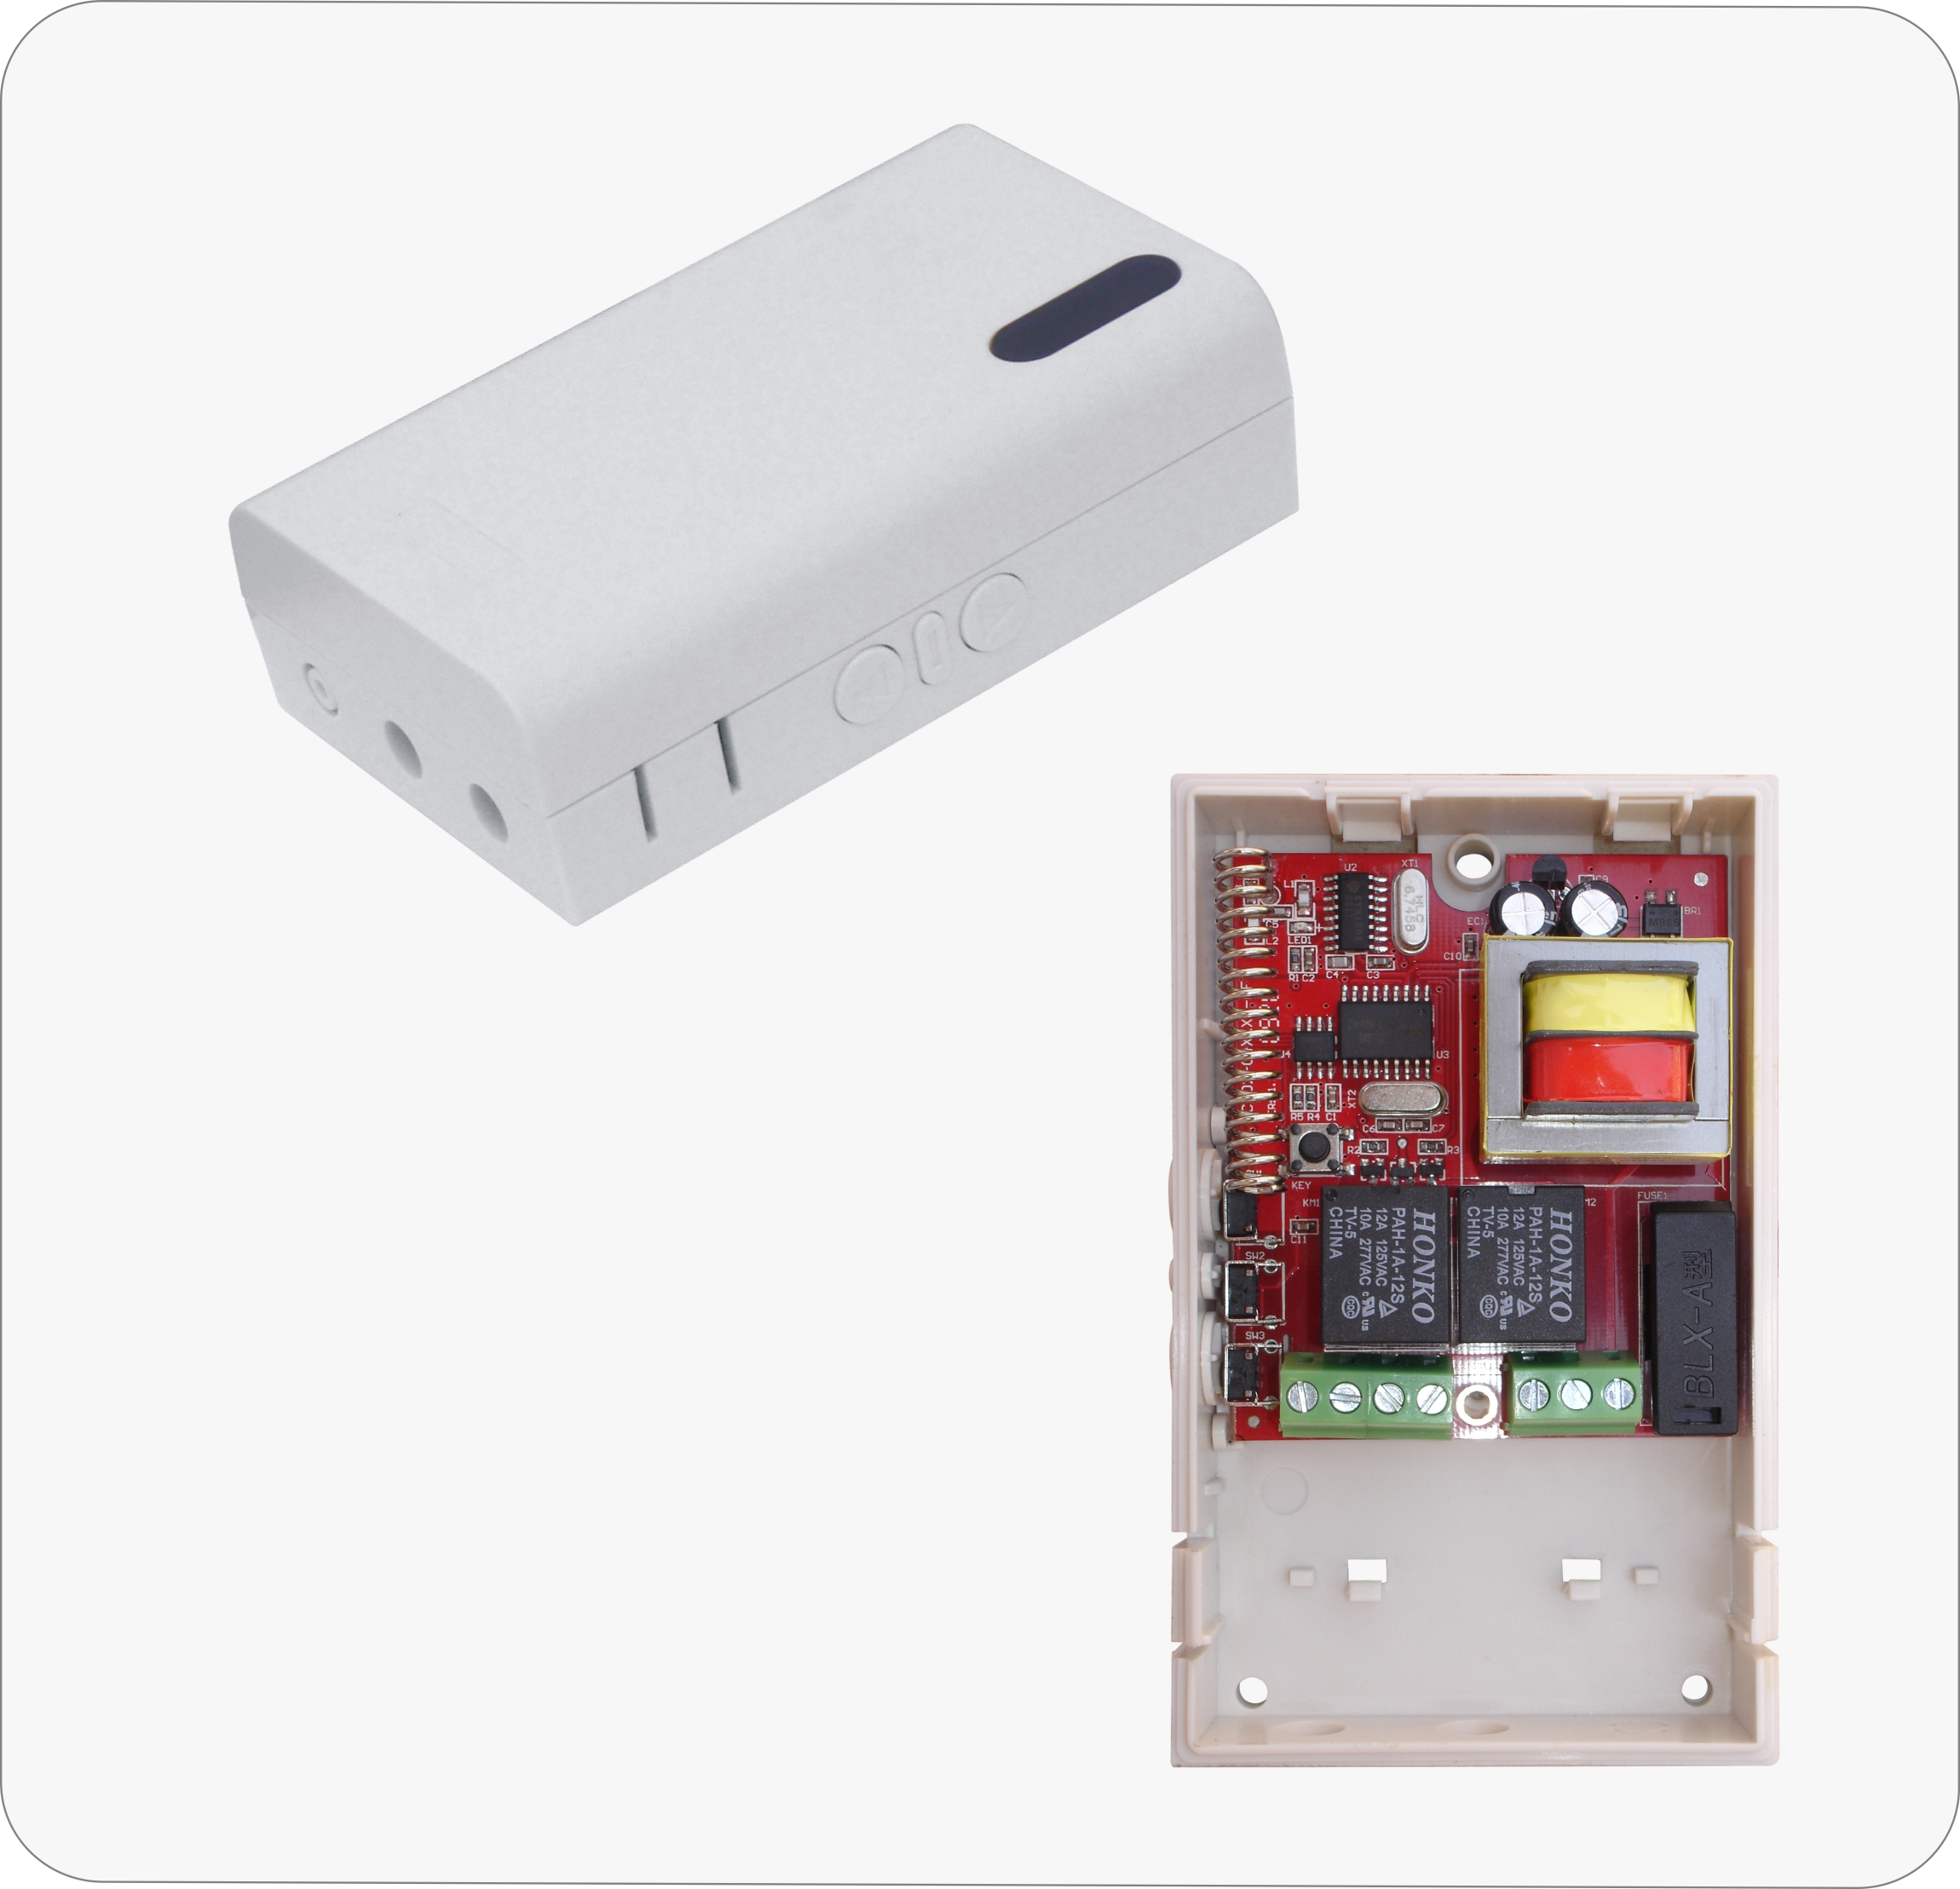 CL800 Wall Controller for METechs CL800's motors